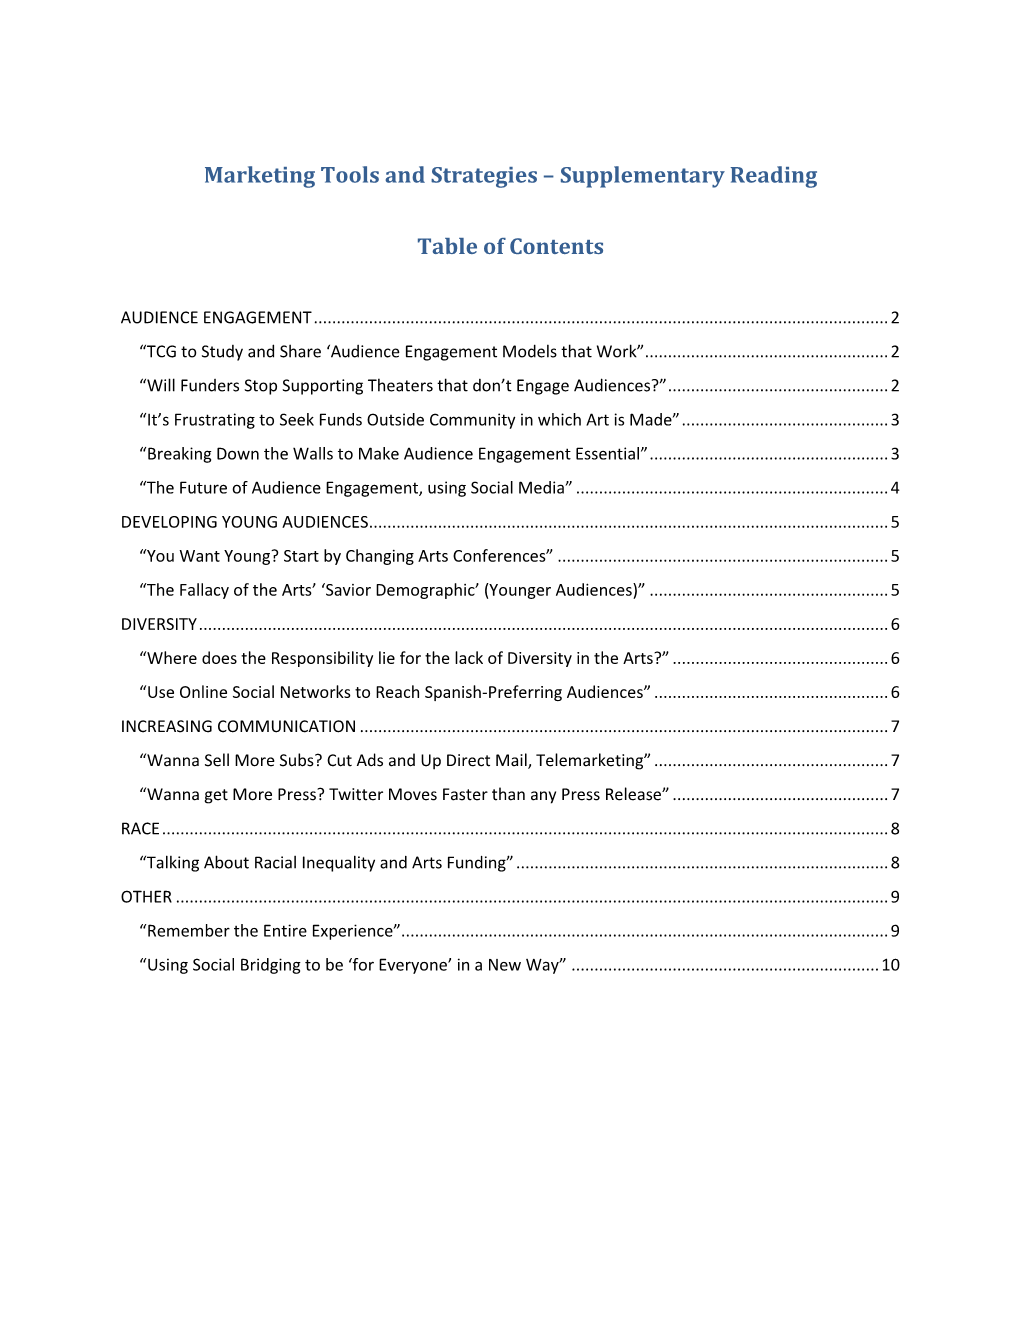 Marketing Tools and Strategies – Supplementary Reading Table Of